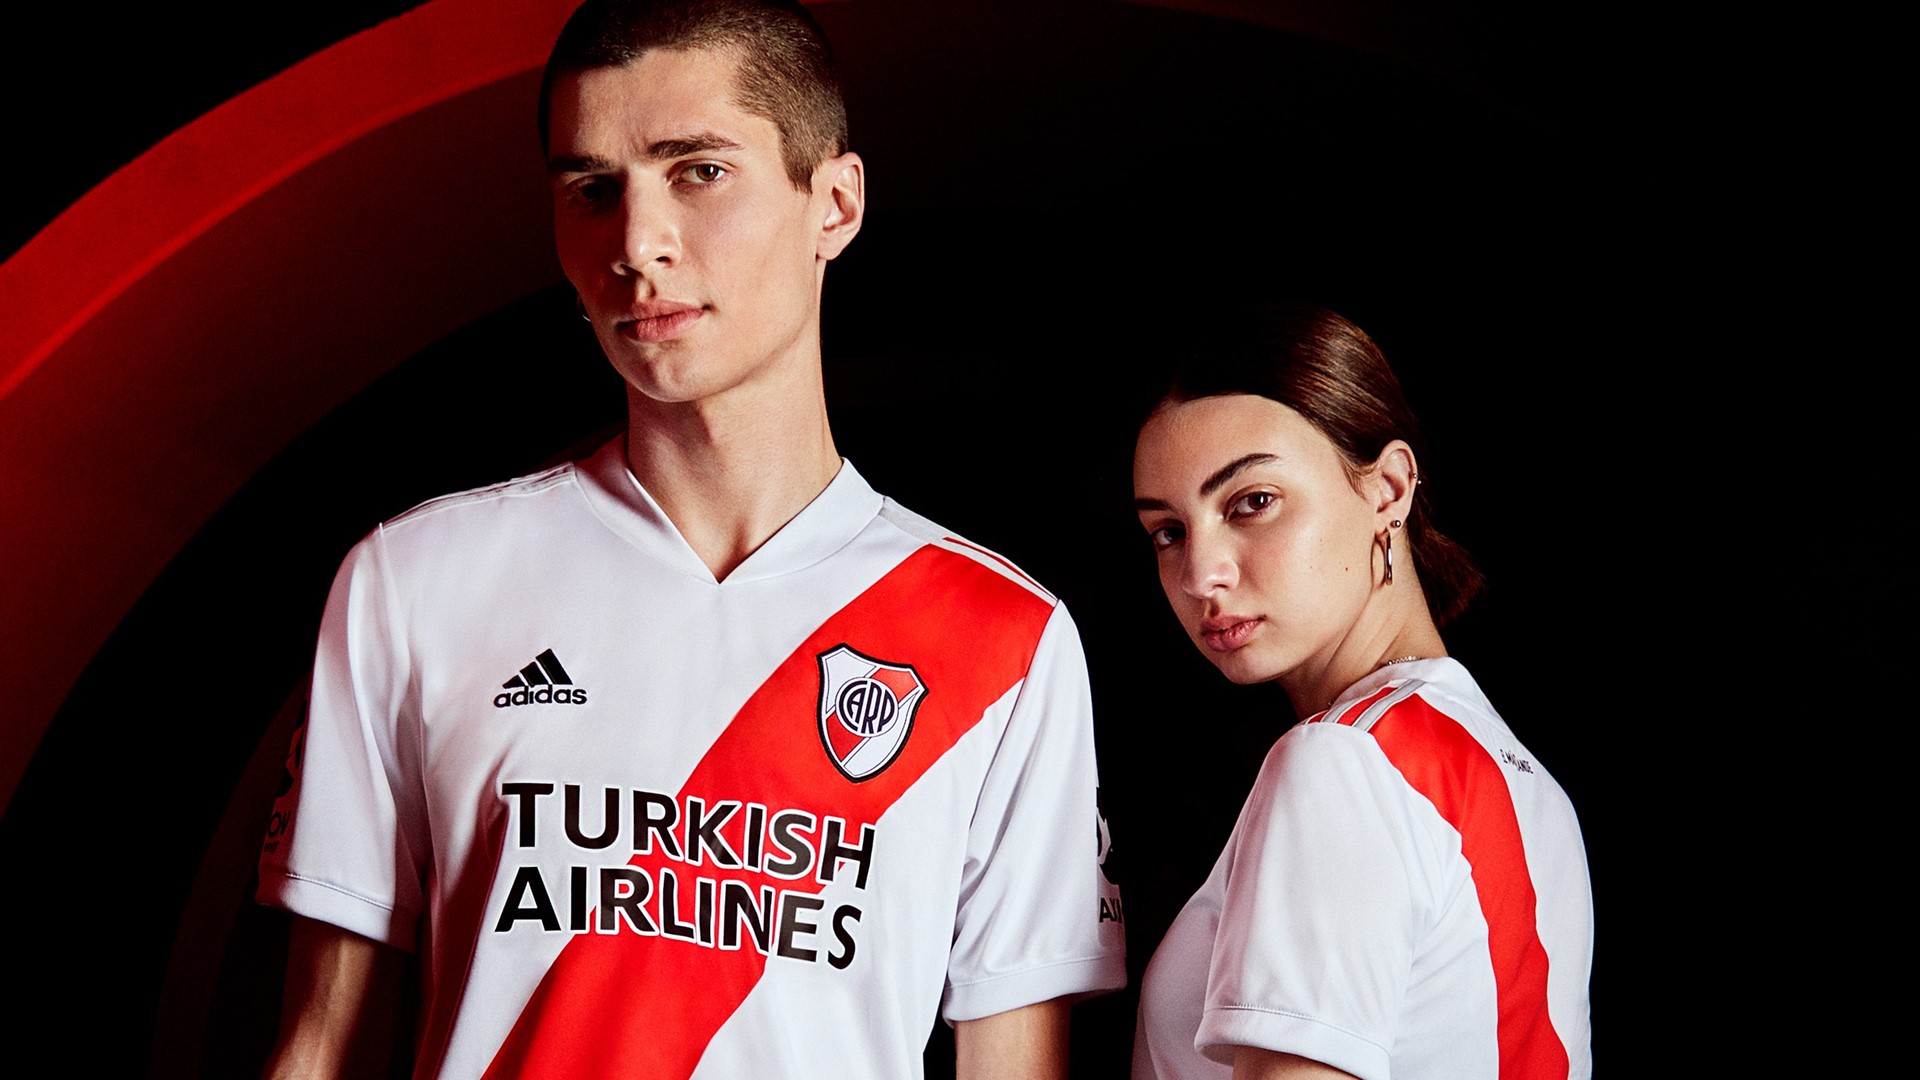 REVEALING THE NEW RIVER PLATE HOME JERSEY